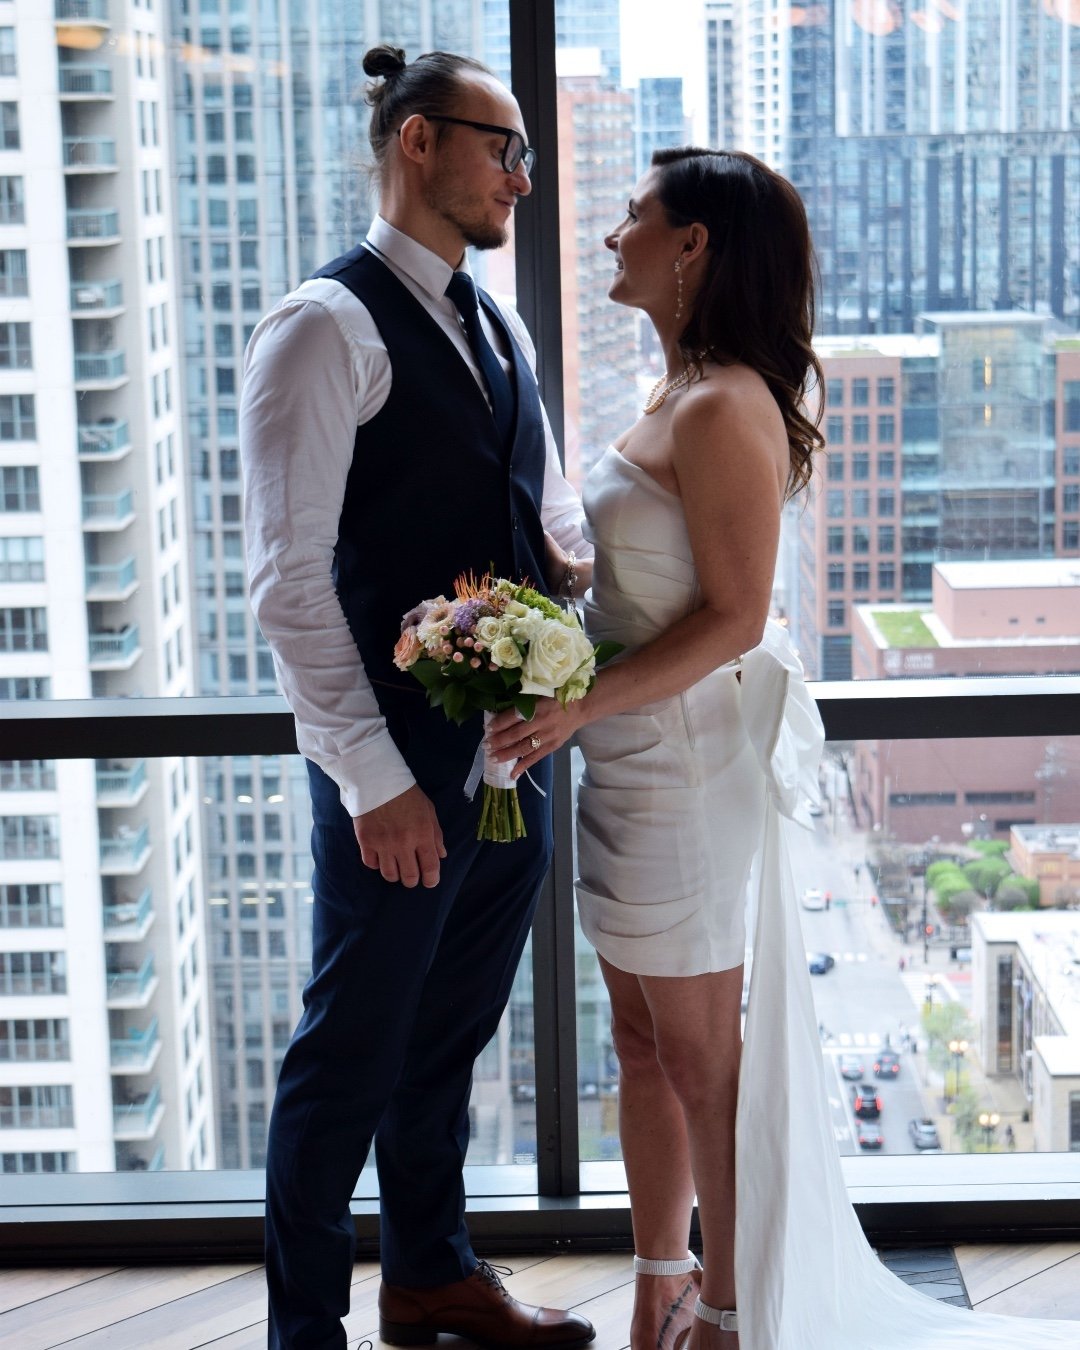 Say &ldquo;I Do&rdquo; above the clouds at Twenty-Six! With panoramic views of River North, our indoor and outdoor terrace is the perfect place to celebrate your wedding day 💕💍✨
.
.
.
#twentysixchicago #eventvenue #chicagoevents #weddingreception #